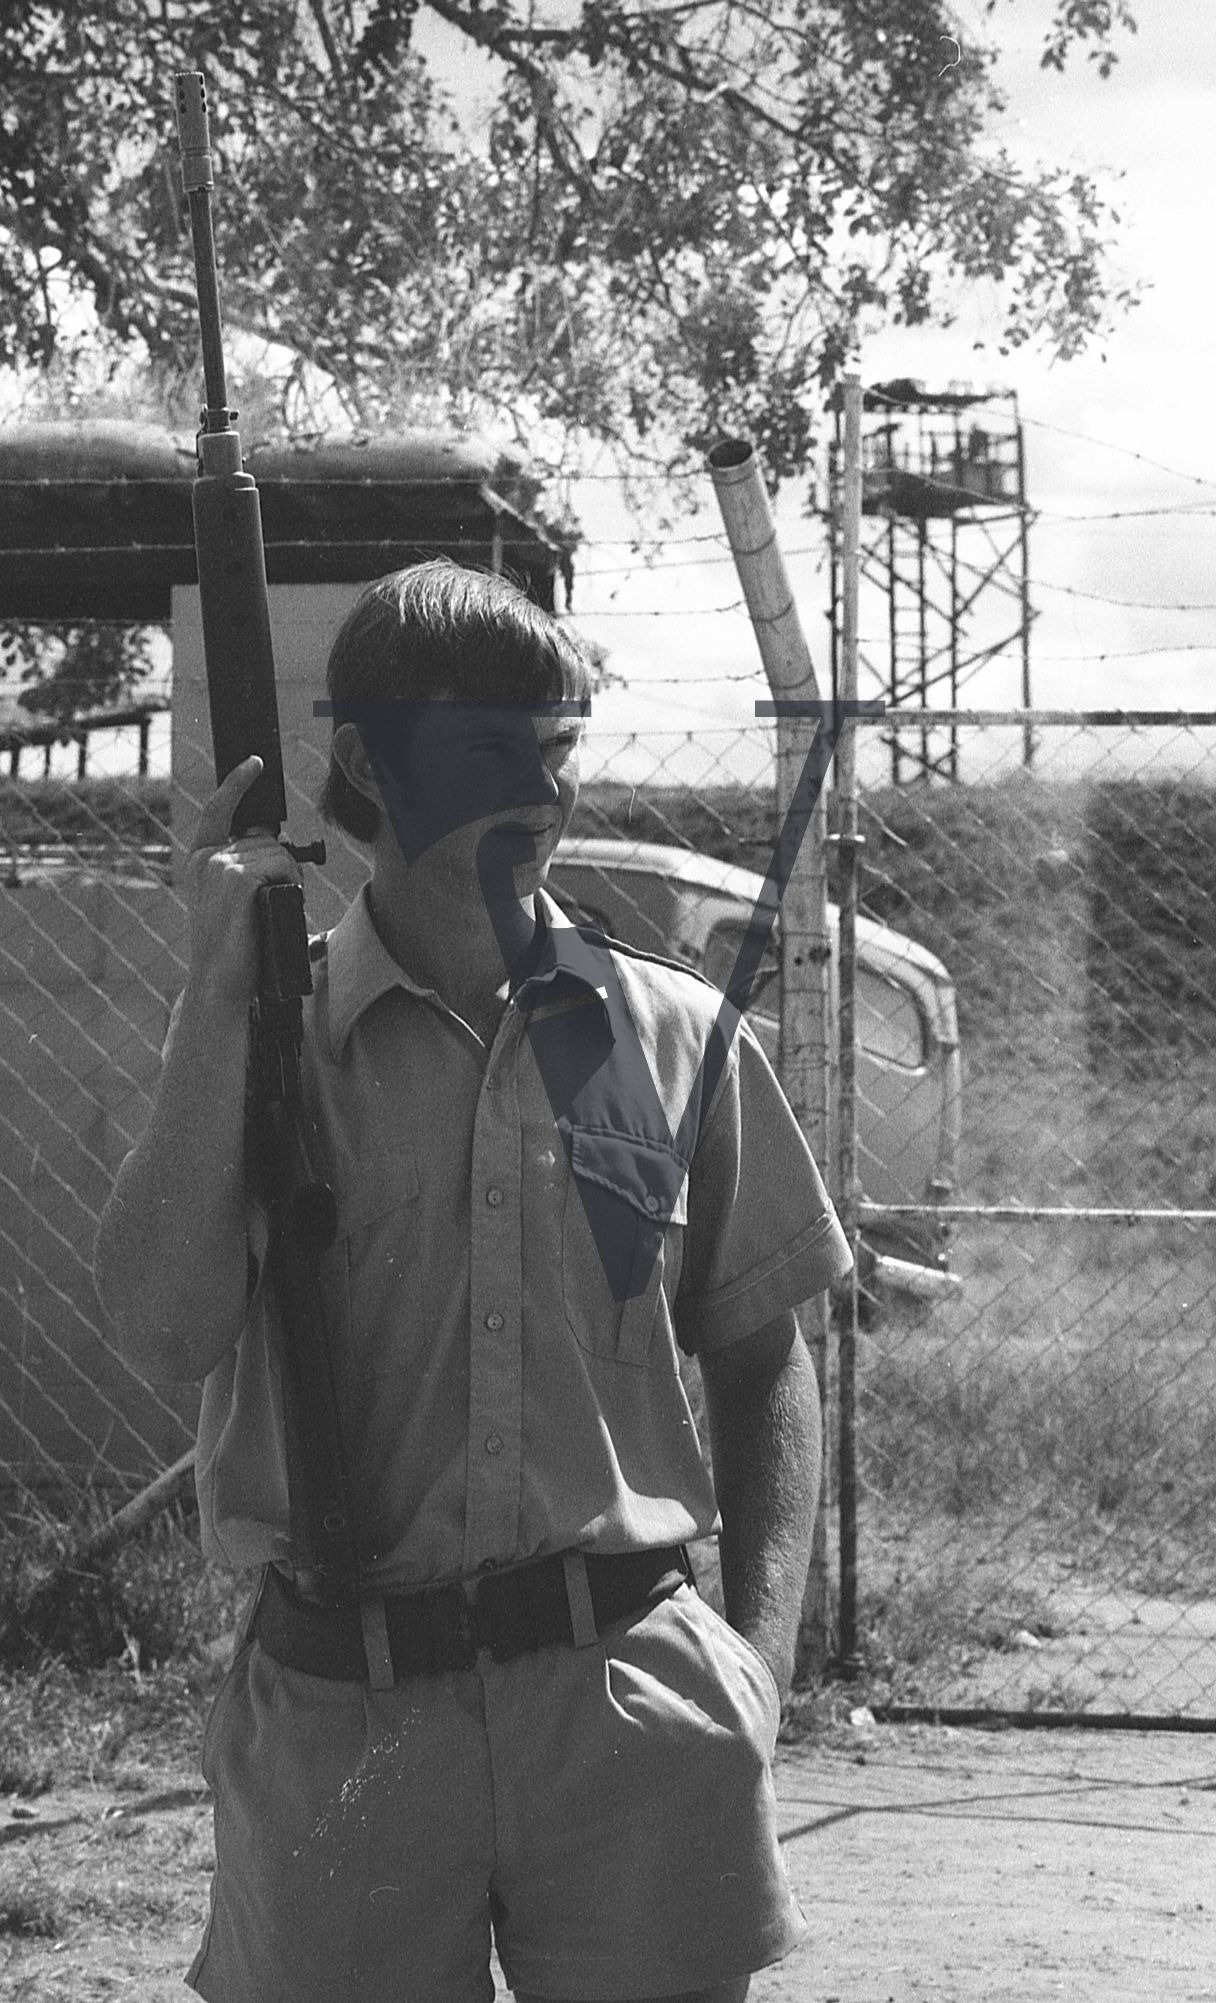 Rhodesia, “protected village”, young guard with FN FAL battle rifle, portrait.